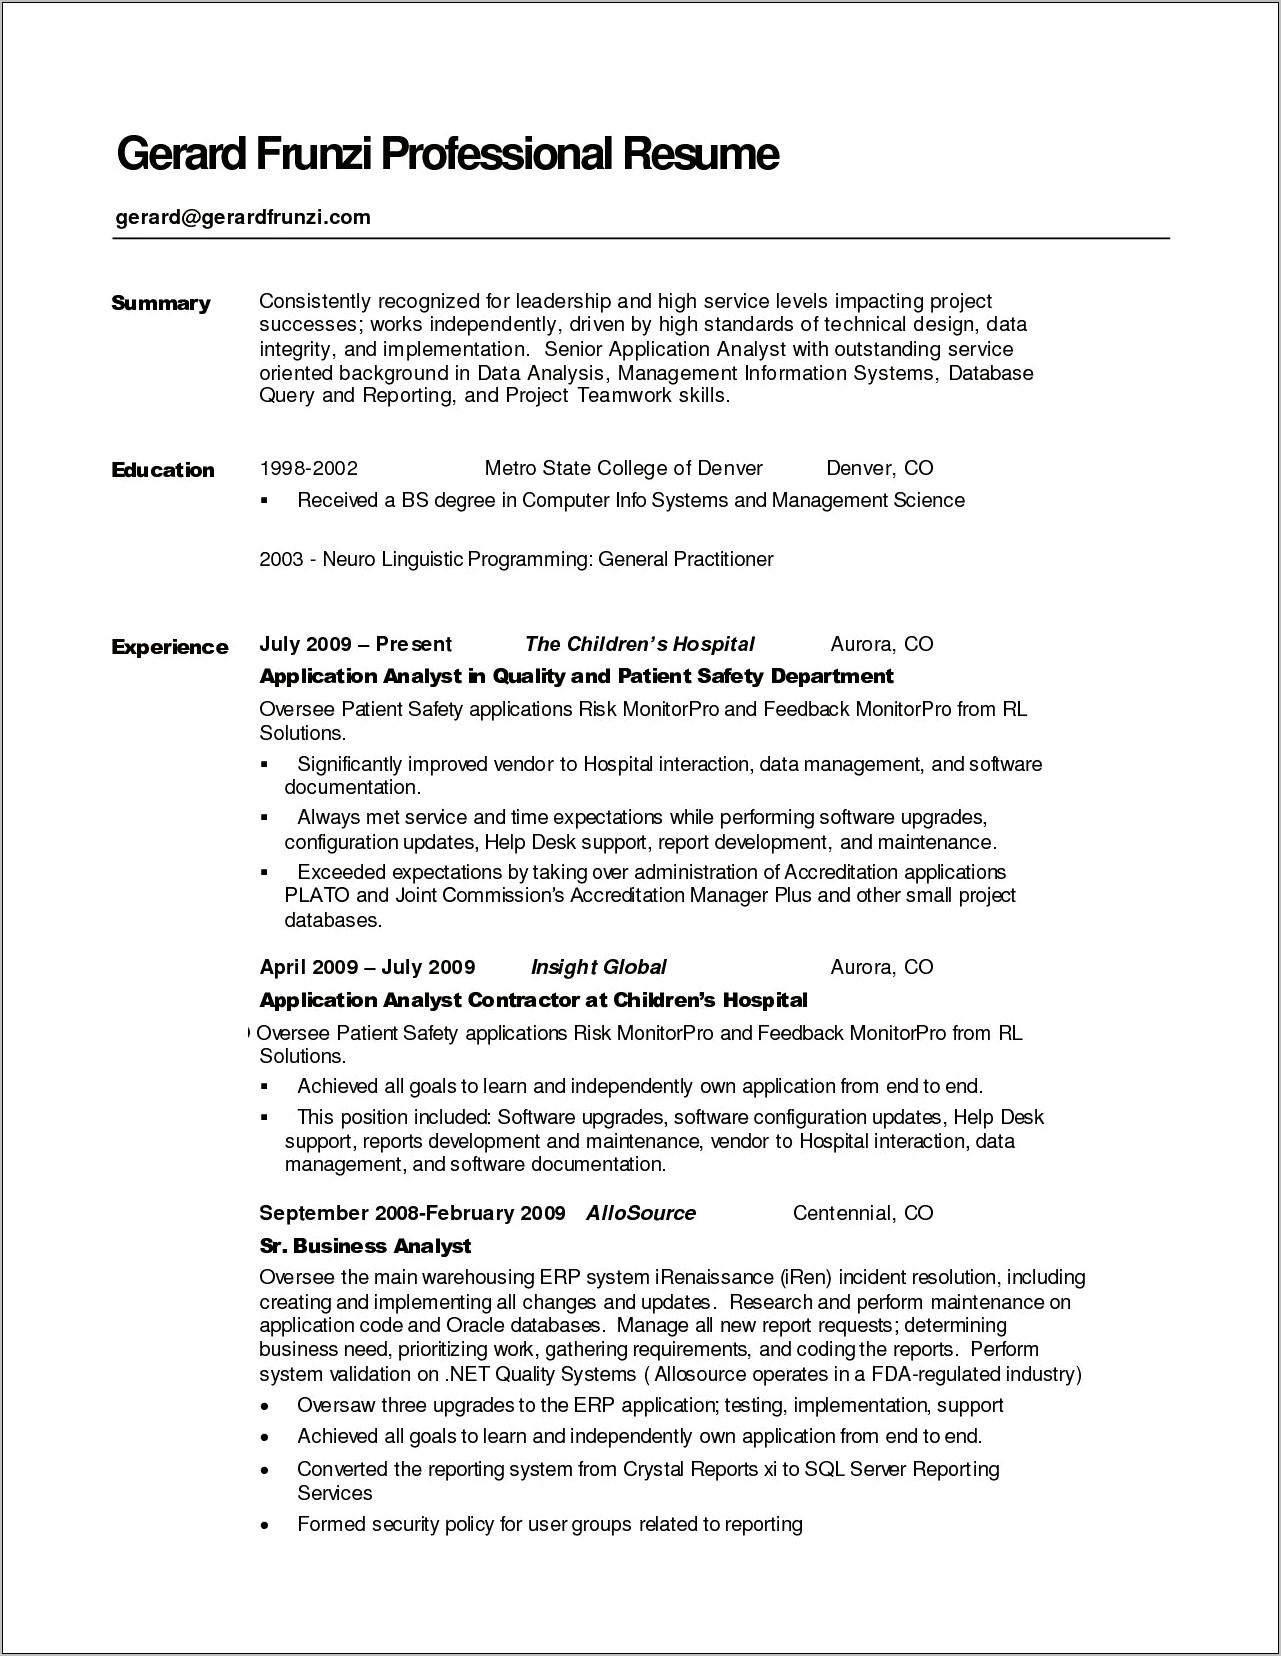 Good Work Quotes For Resume About Being Interchangable